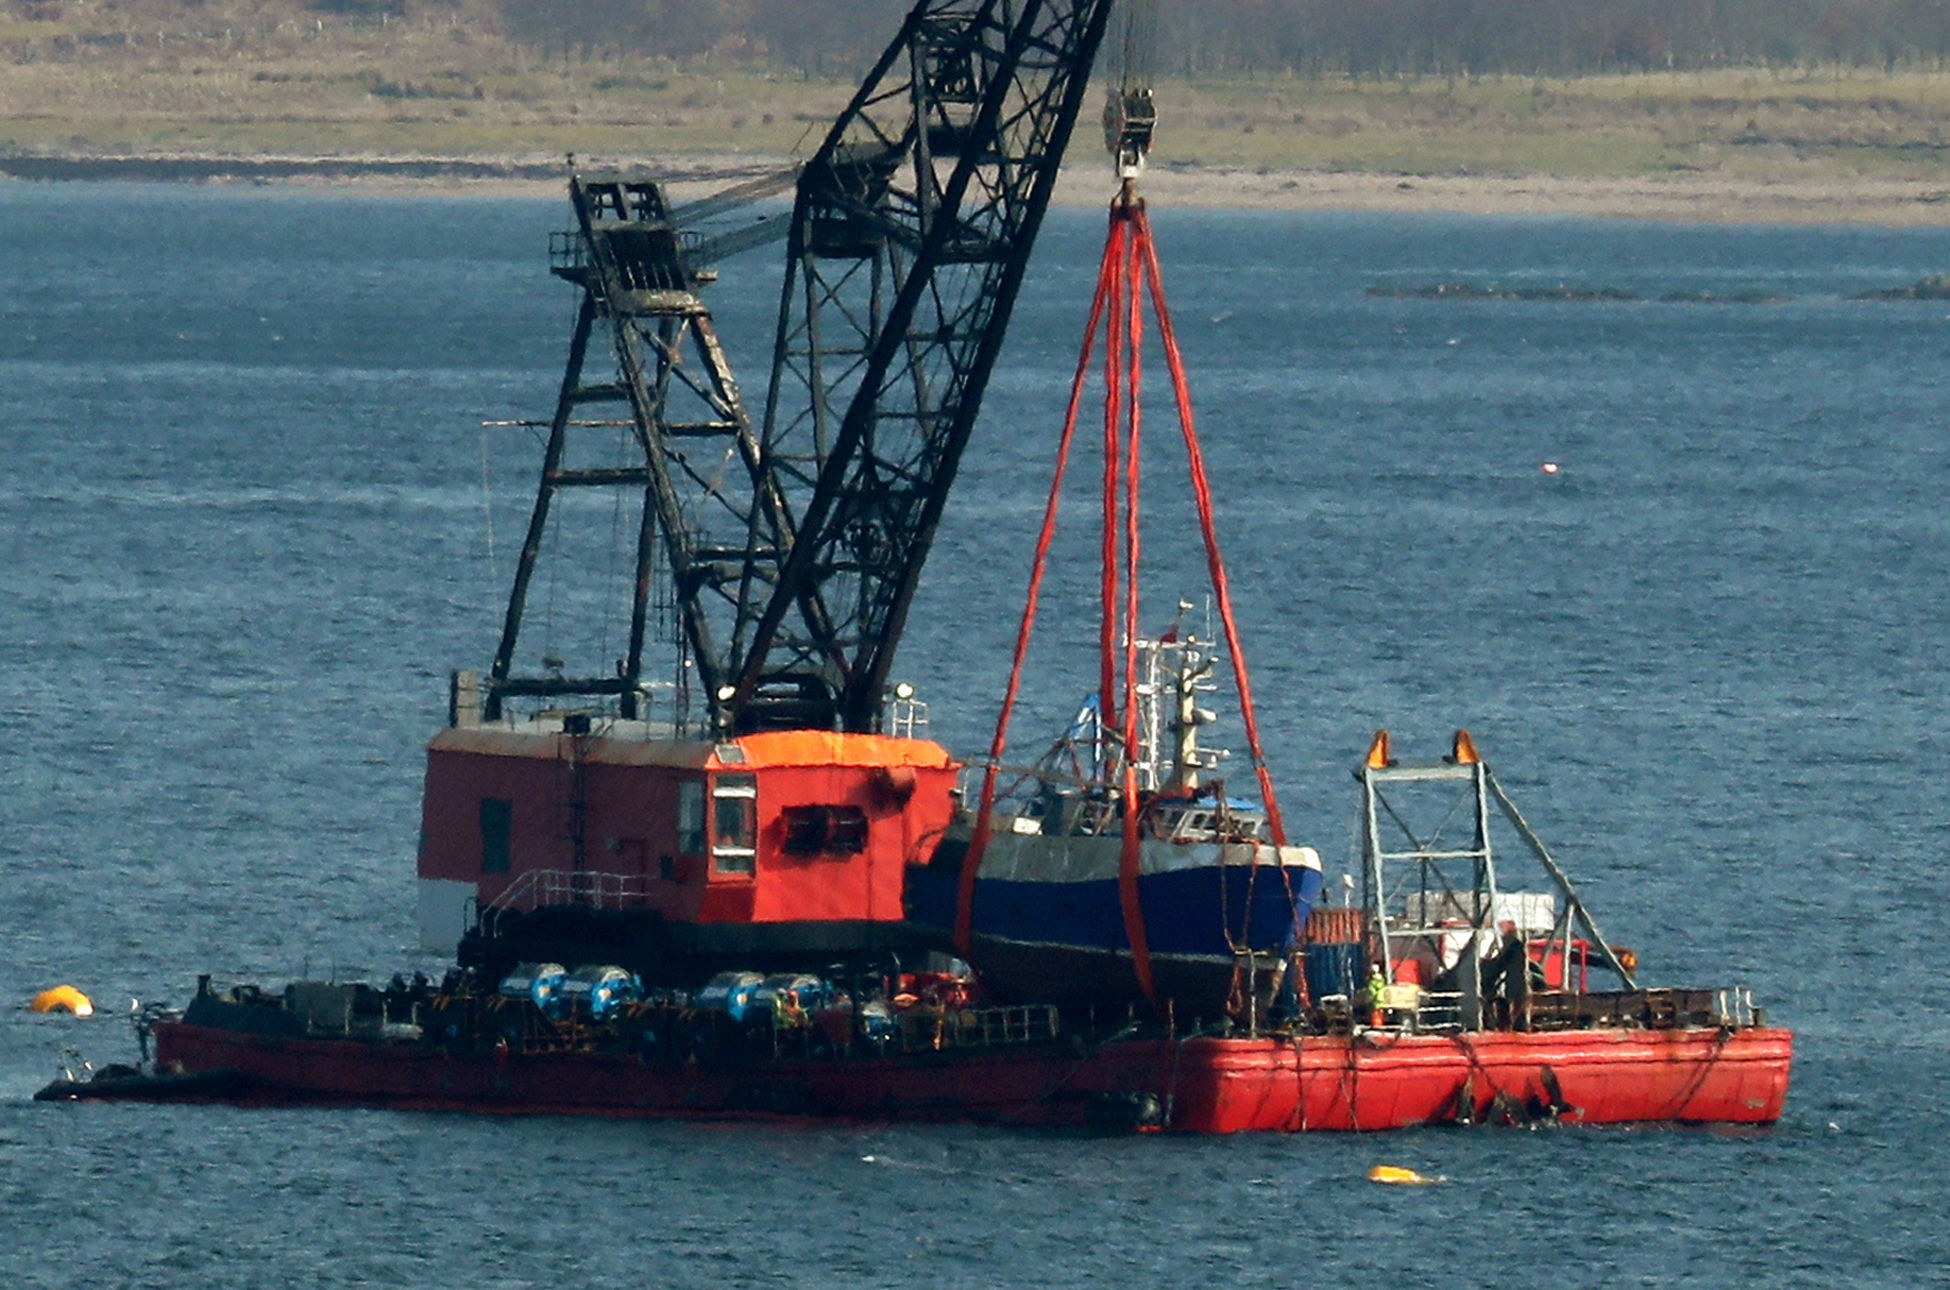 The Nancy Glen fishing trawler sits on a barge on Loch Fyne after its recovery